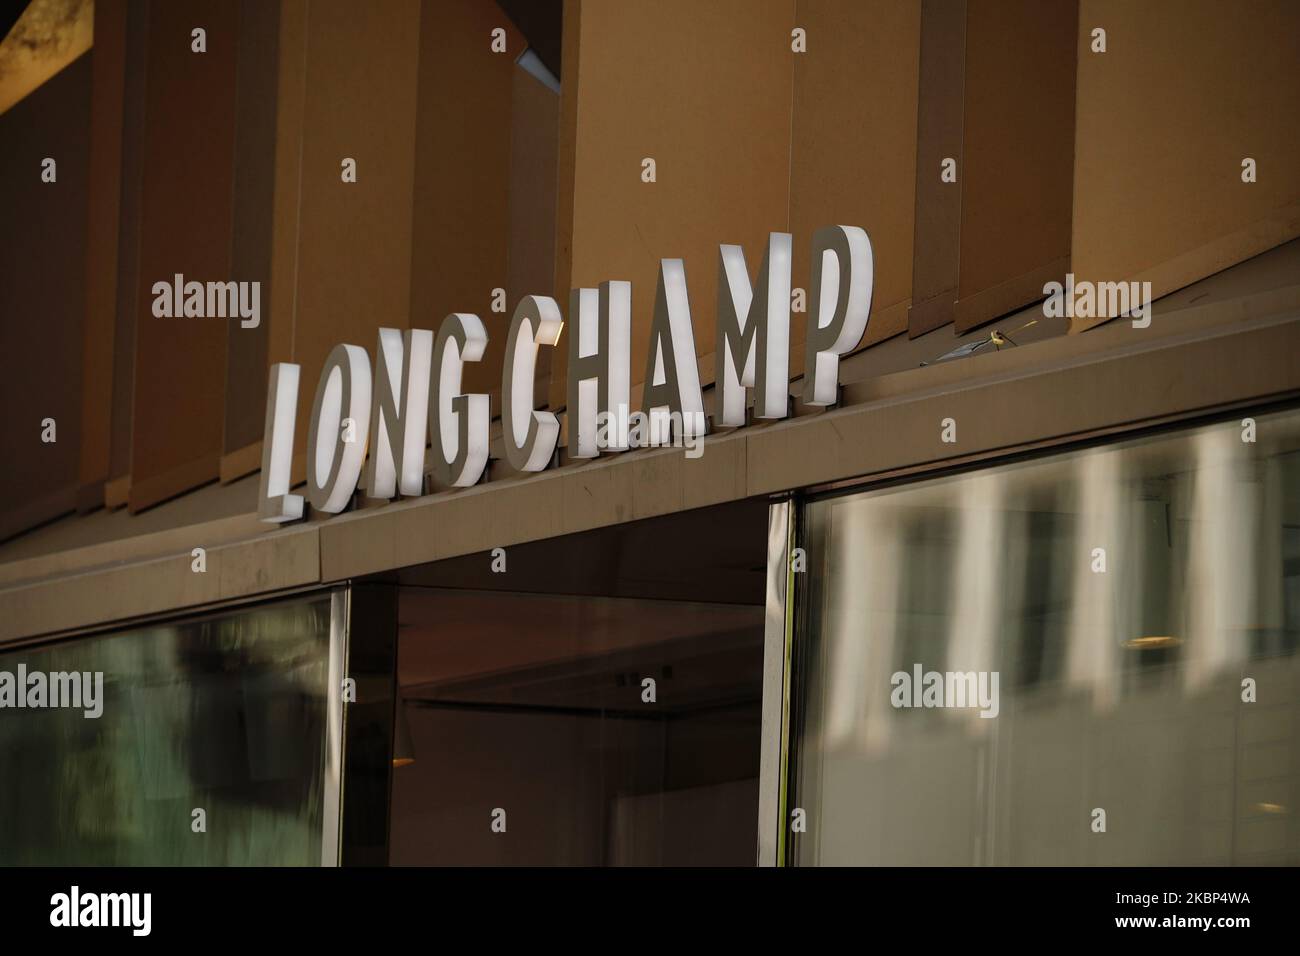 A view of Longchamp during the coronavirus pandemic on May 20, 2020 in 5th Ave., New York City. COVID-19 has spread to most countries around the world, claiming over 316,000 lives with over 4.8 million infections reported. (Photo by John Nacion/NurPhoto) Stock Photo